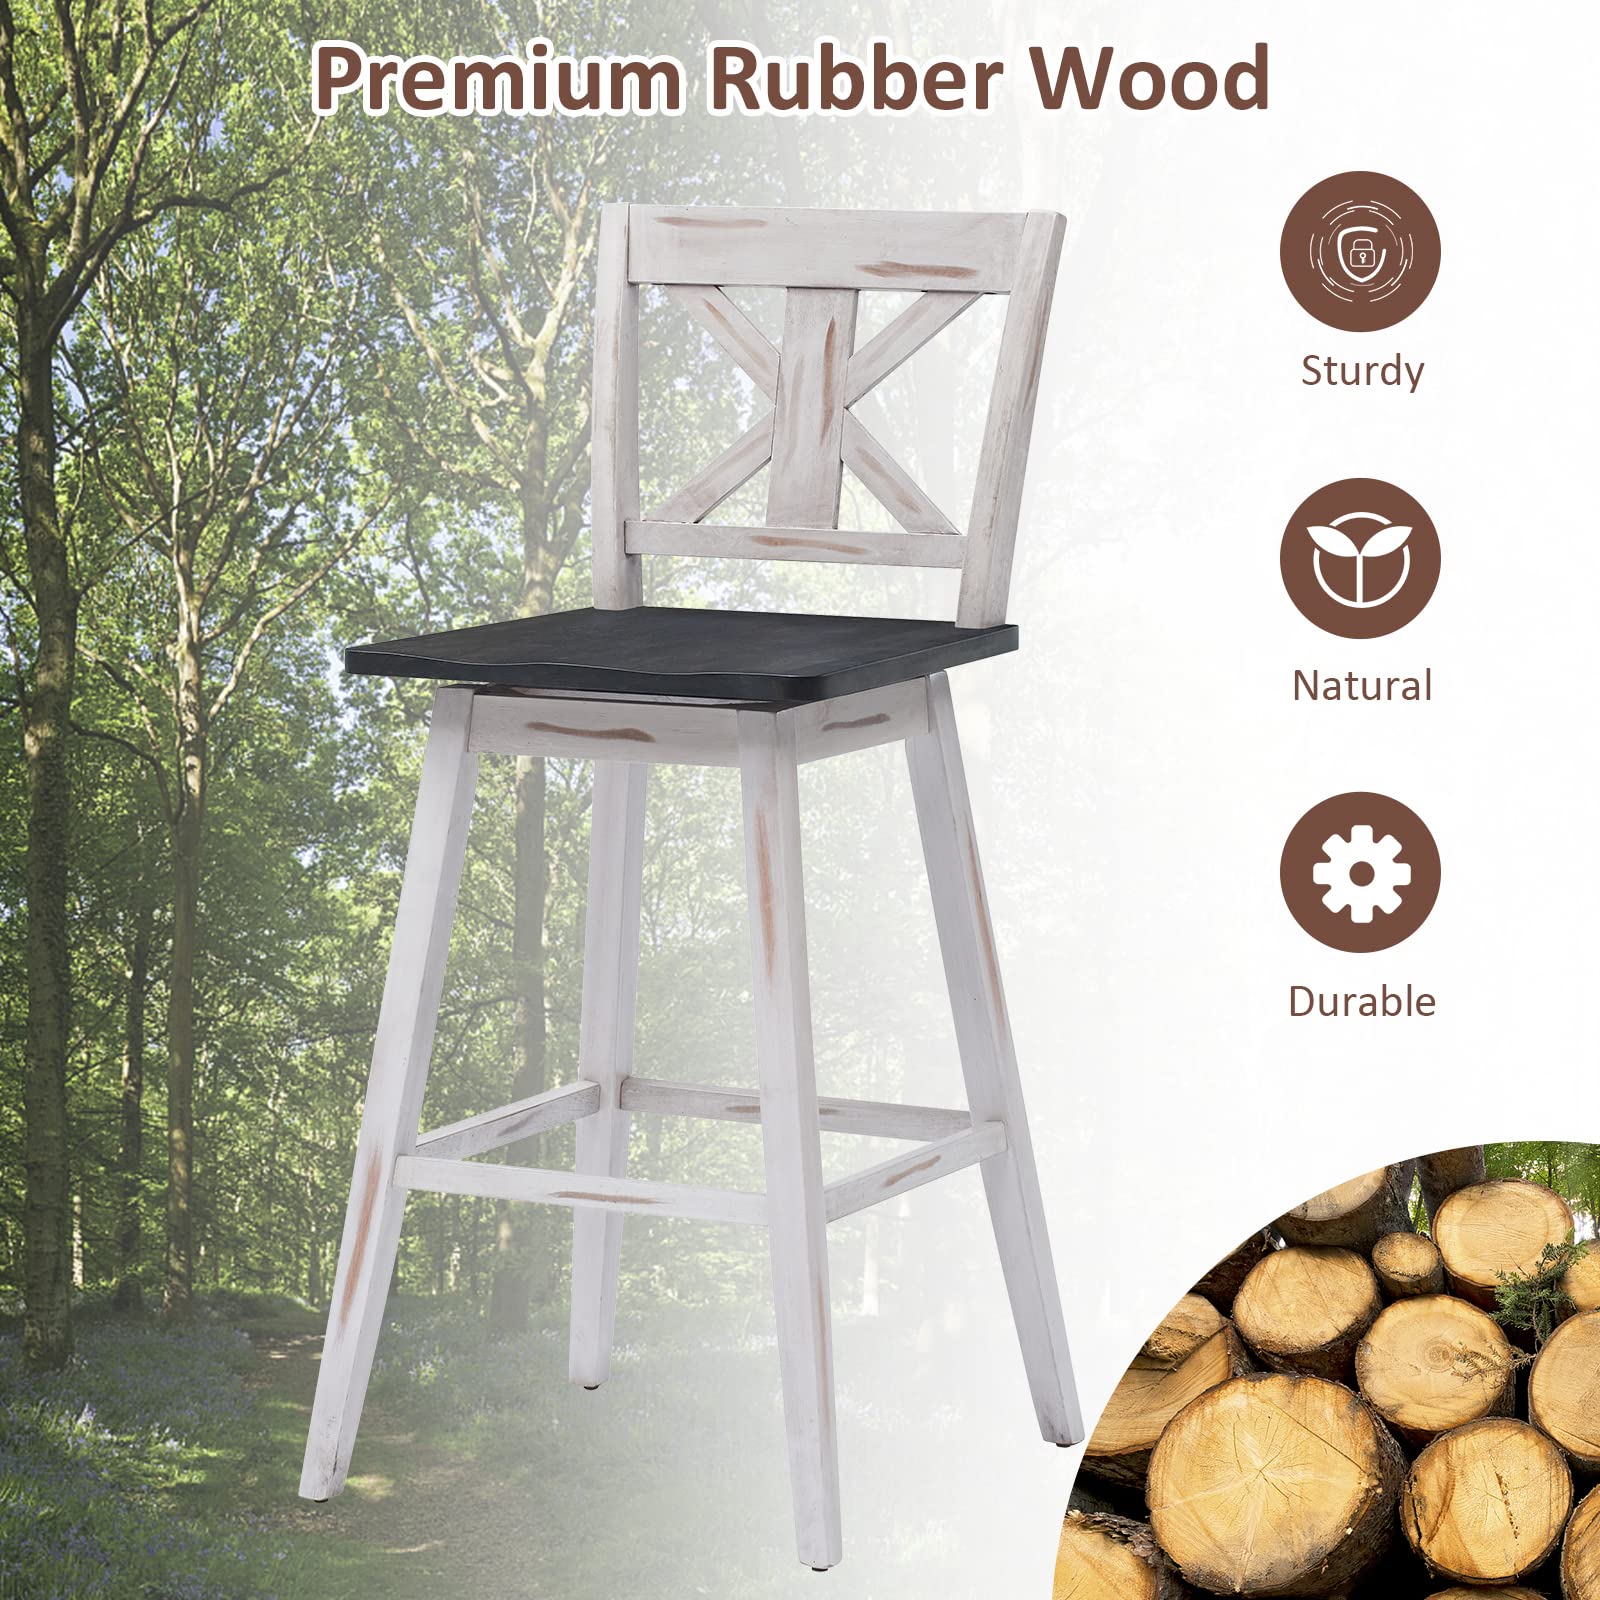 360 Degree Rubber Wood Bar Chairs, Vintage Bar Stools for Home, Restaurant & Pub